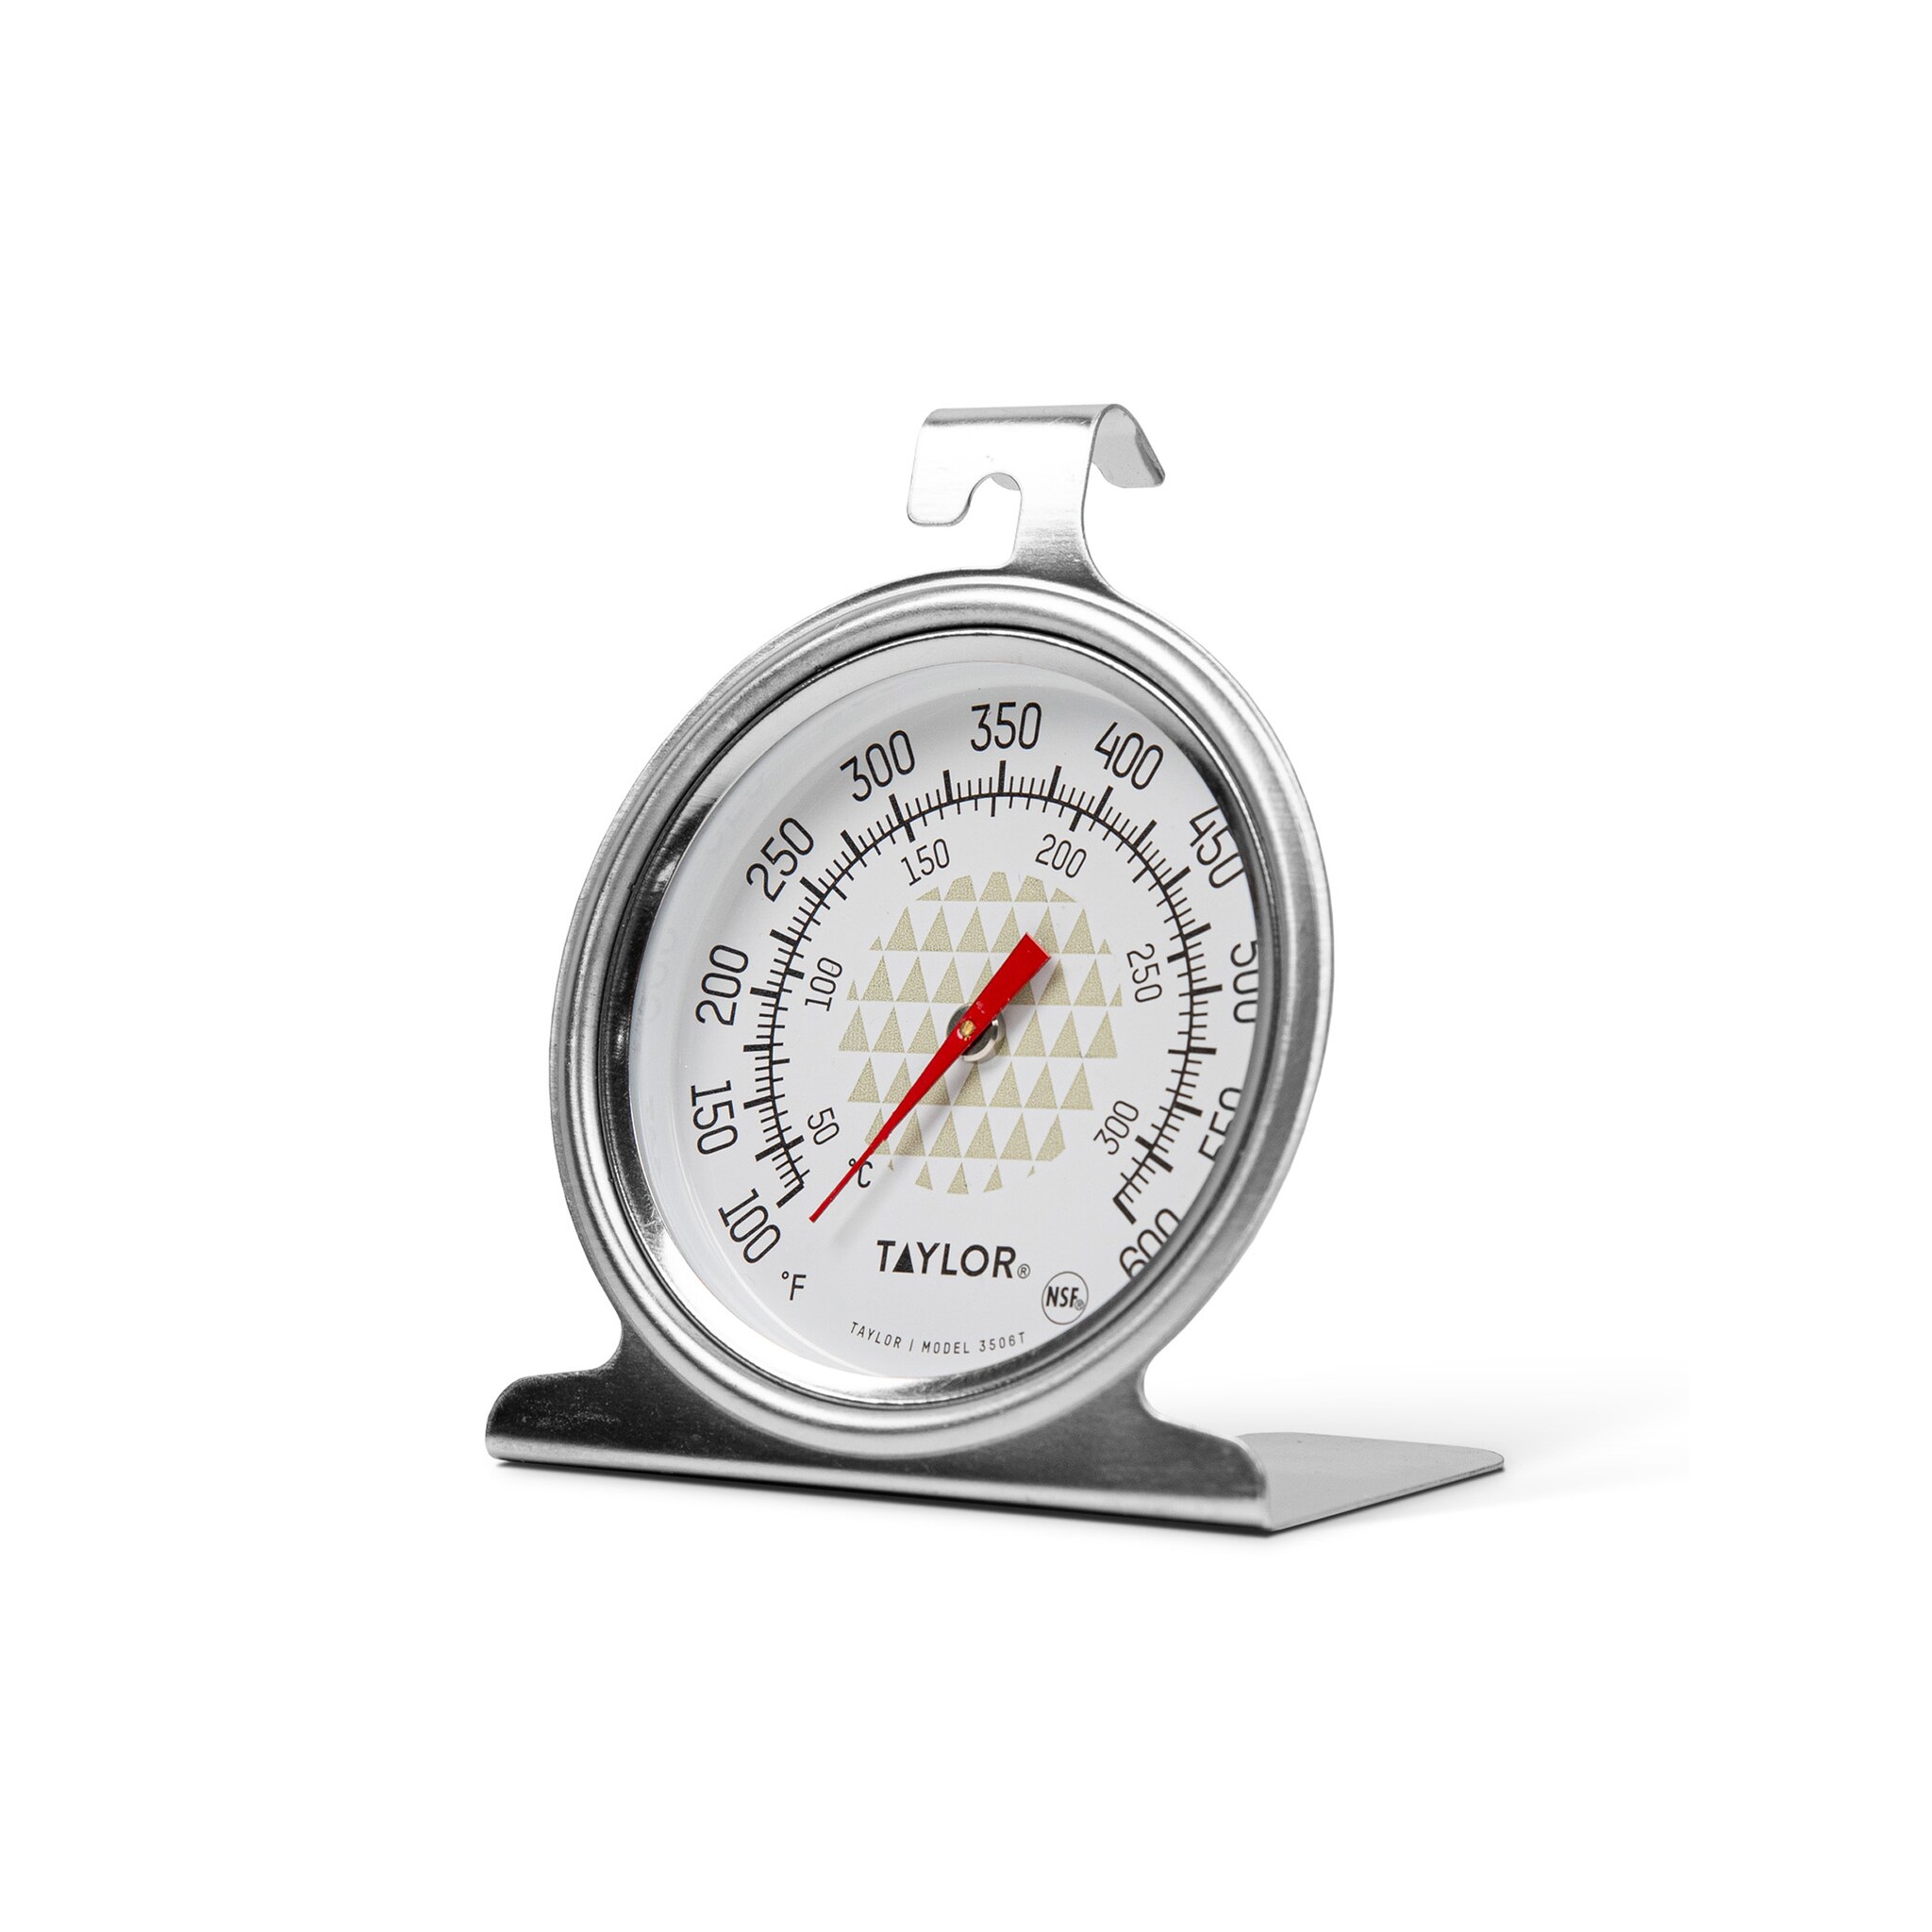 https://images.nicindustries.com/common/media/225158/oventhermometer-dt20231219163950488624.jpg?1703003992